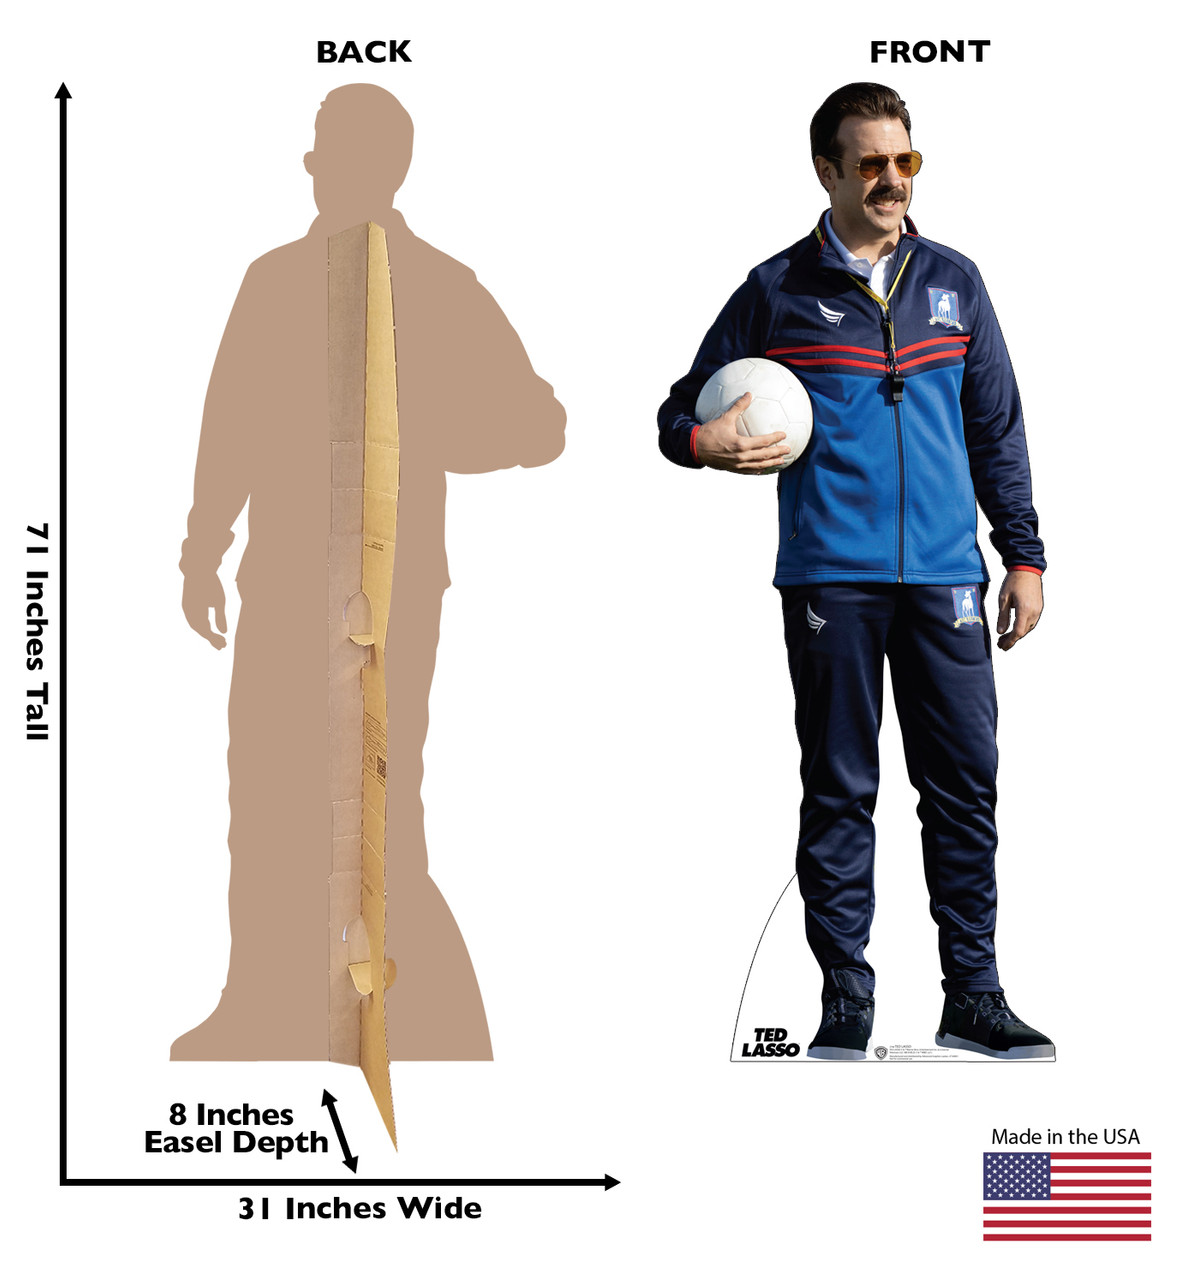 Life-size cardboard standee of Ted Lasso with front and back dimensions.